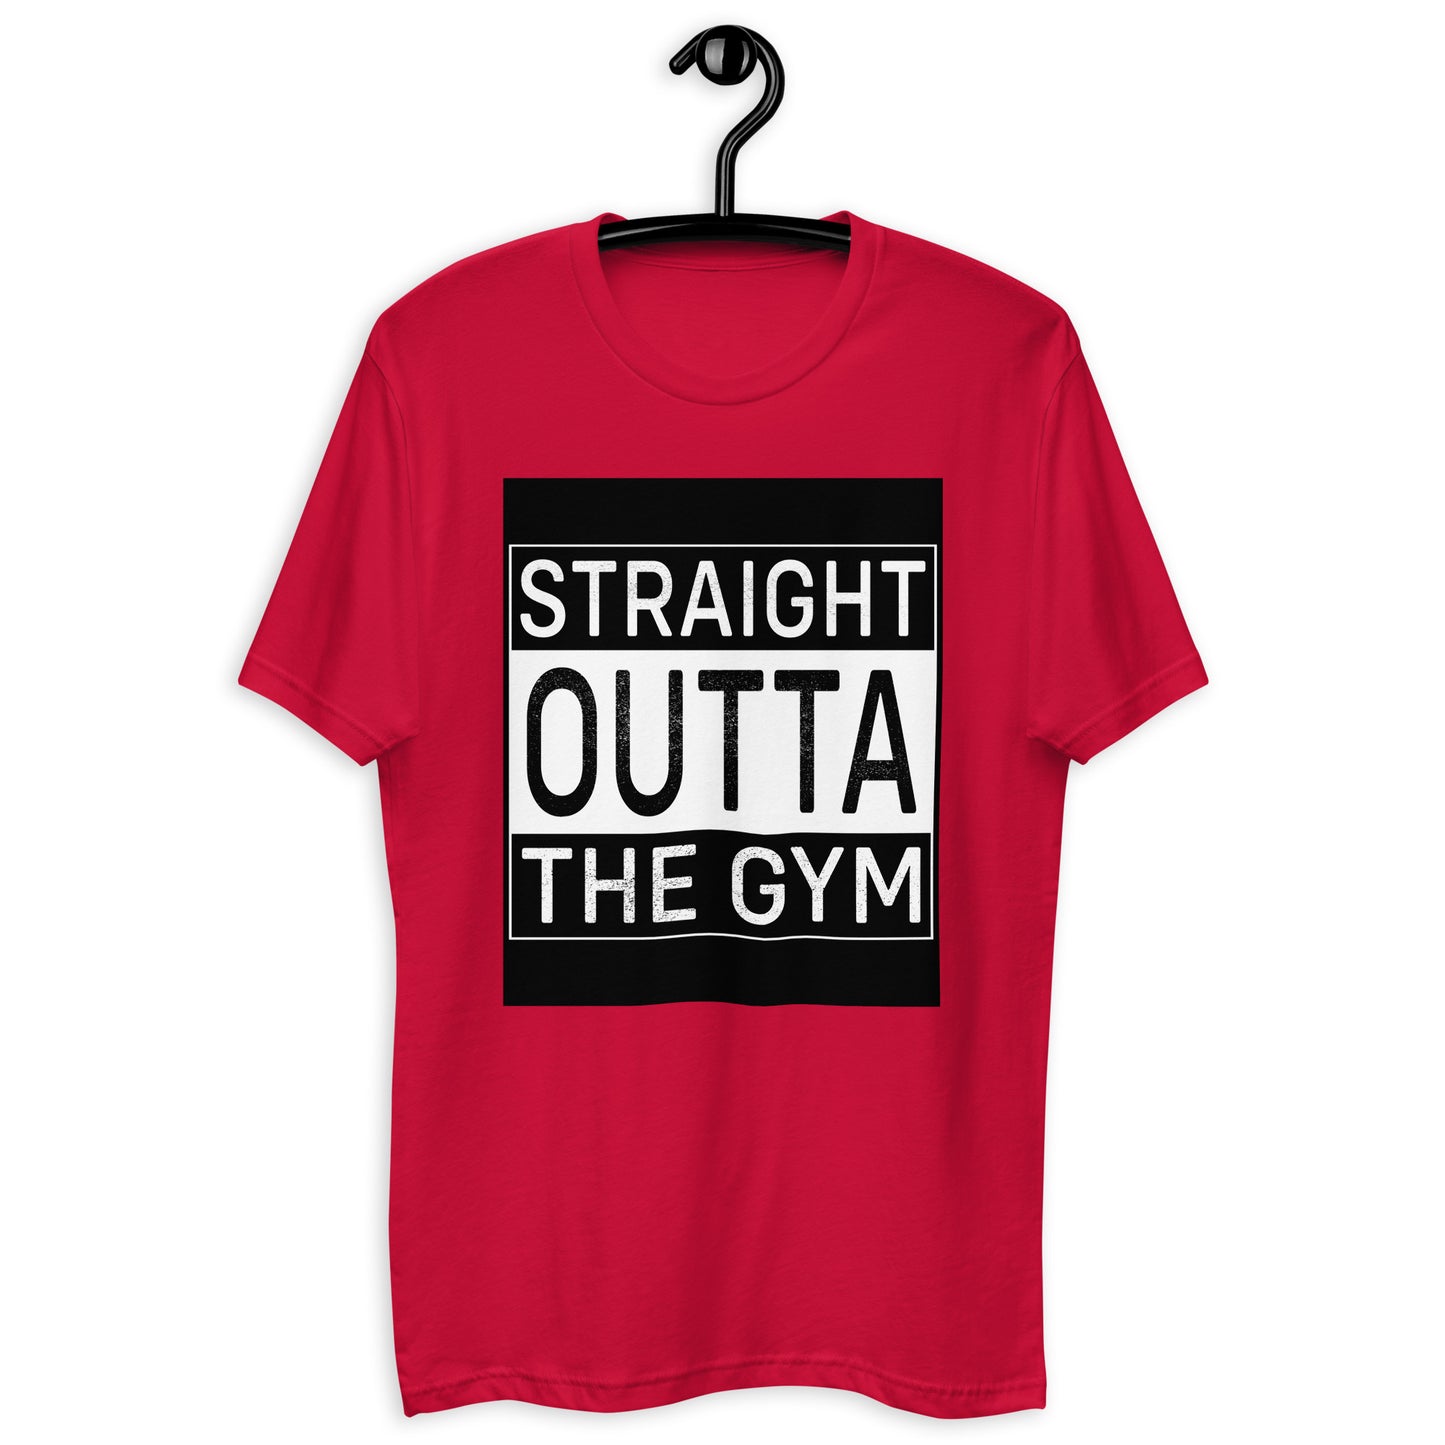 Sparkle-kiss-creations-straight-out-of-the-gym-t-shirt-red